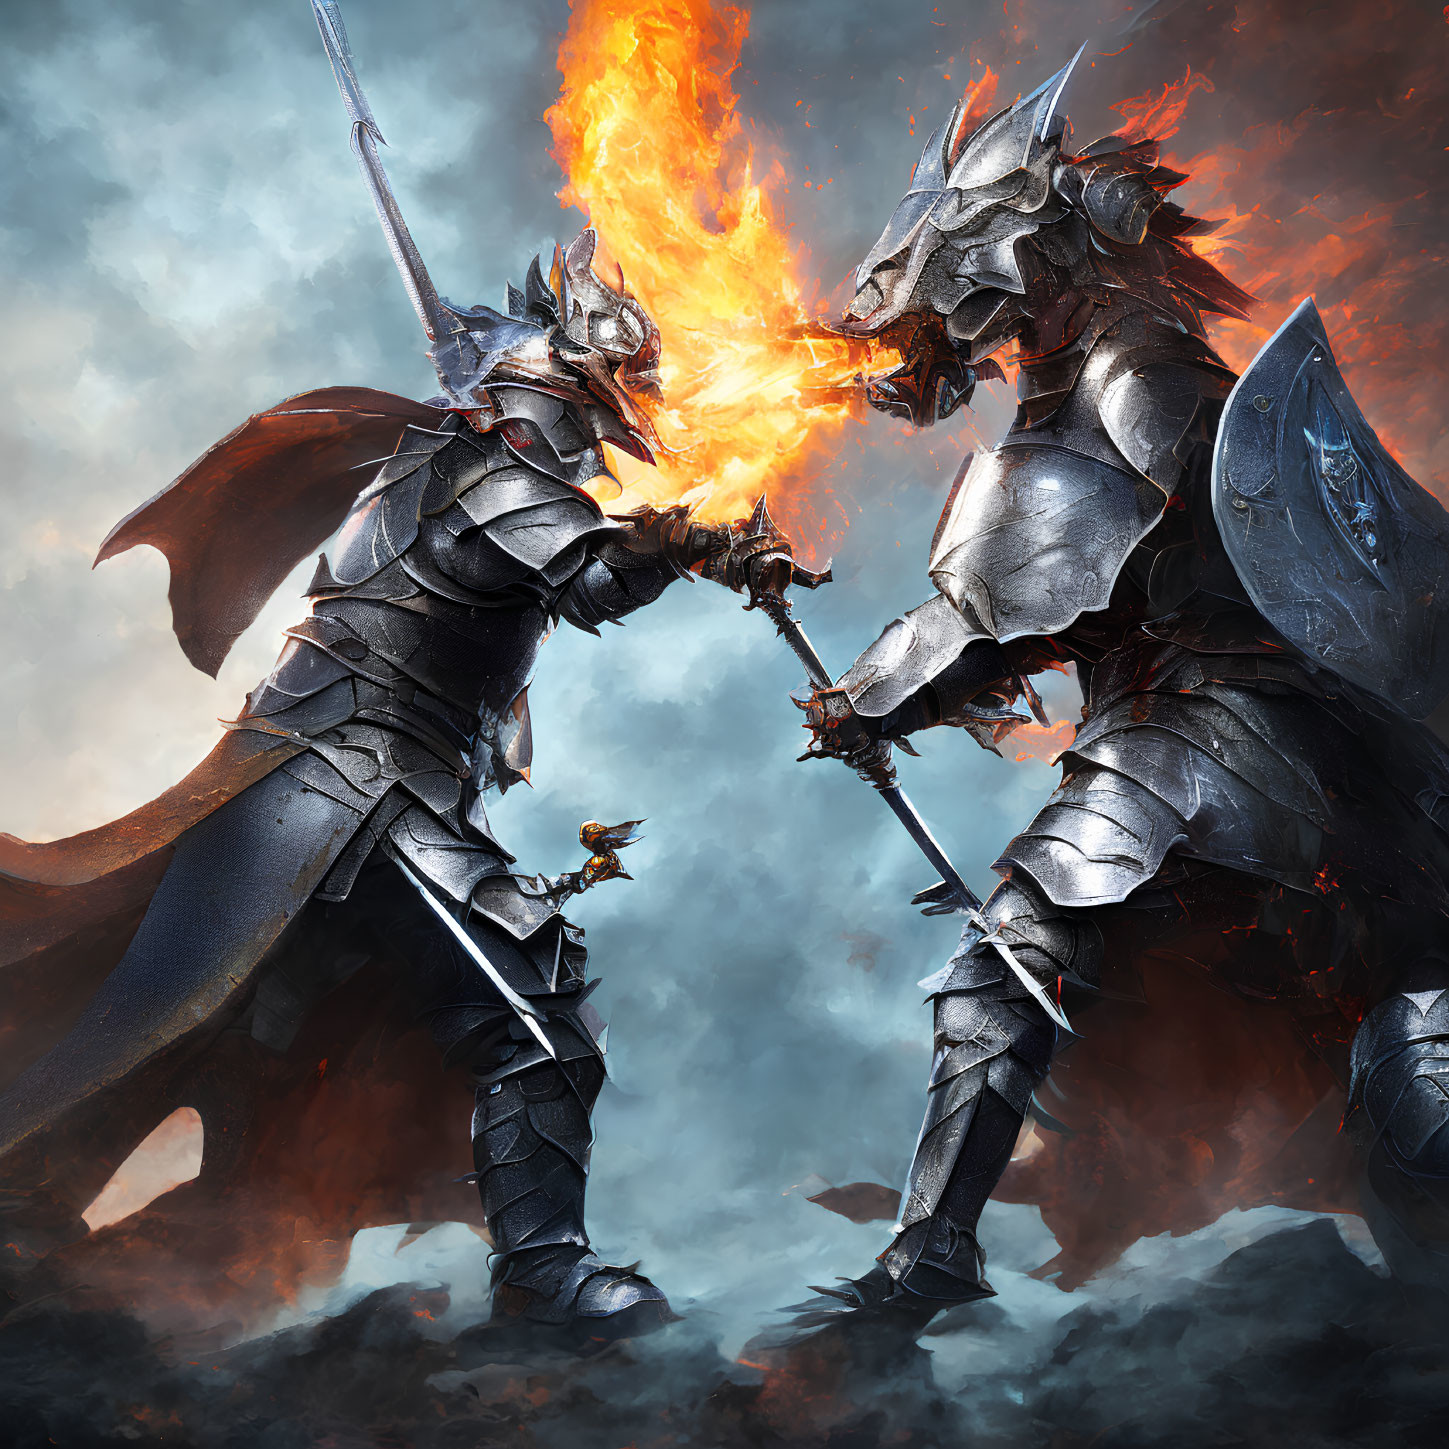 Armored dragon-like warriors in fiery combat amidst smoldering ruins